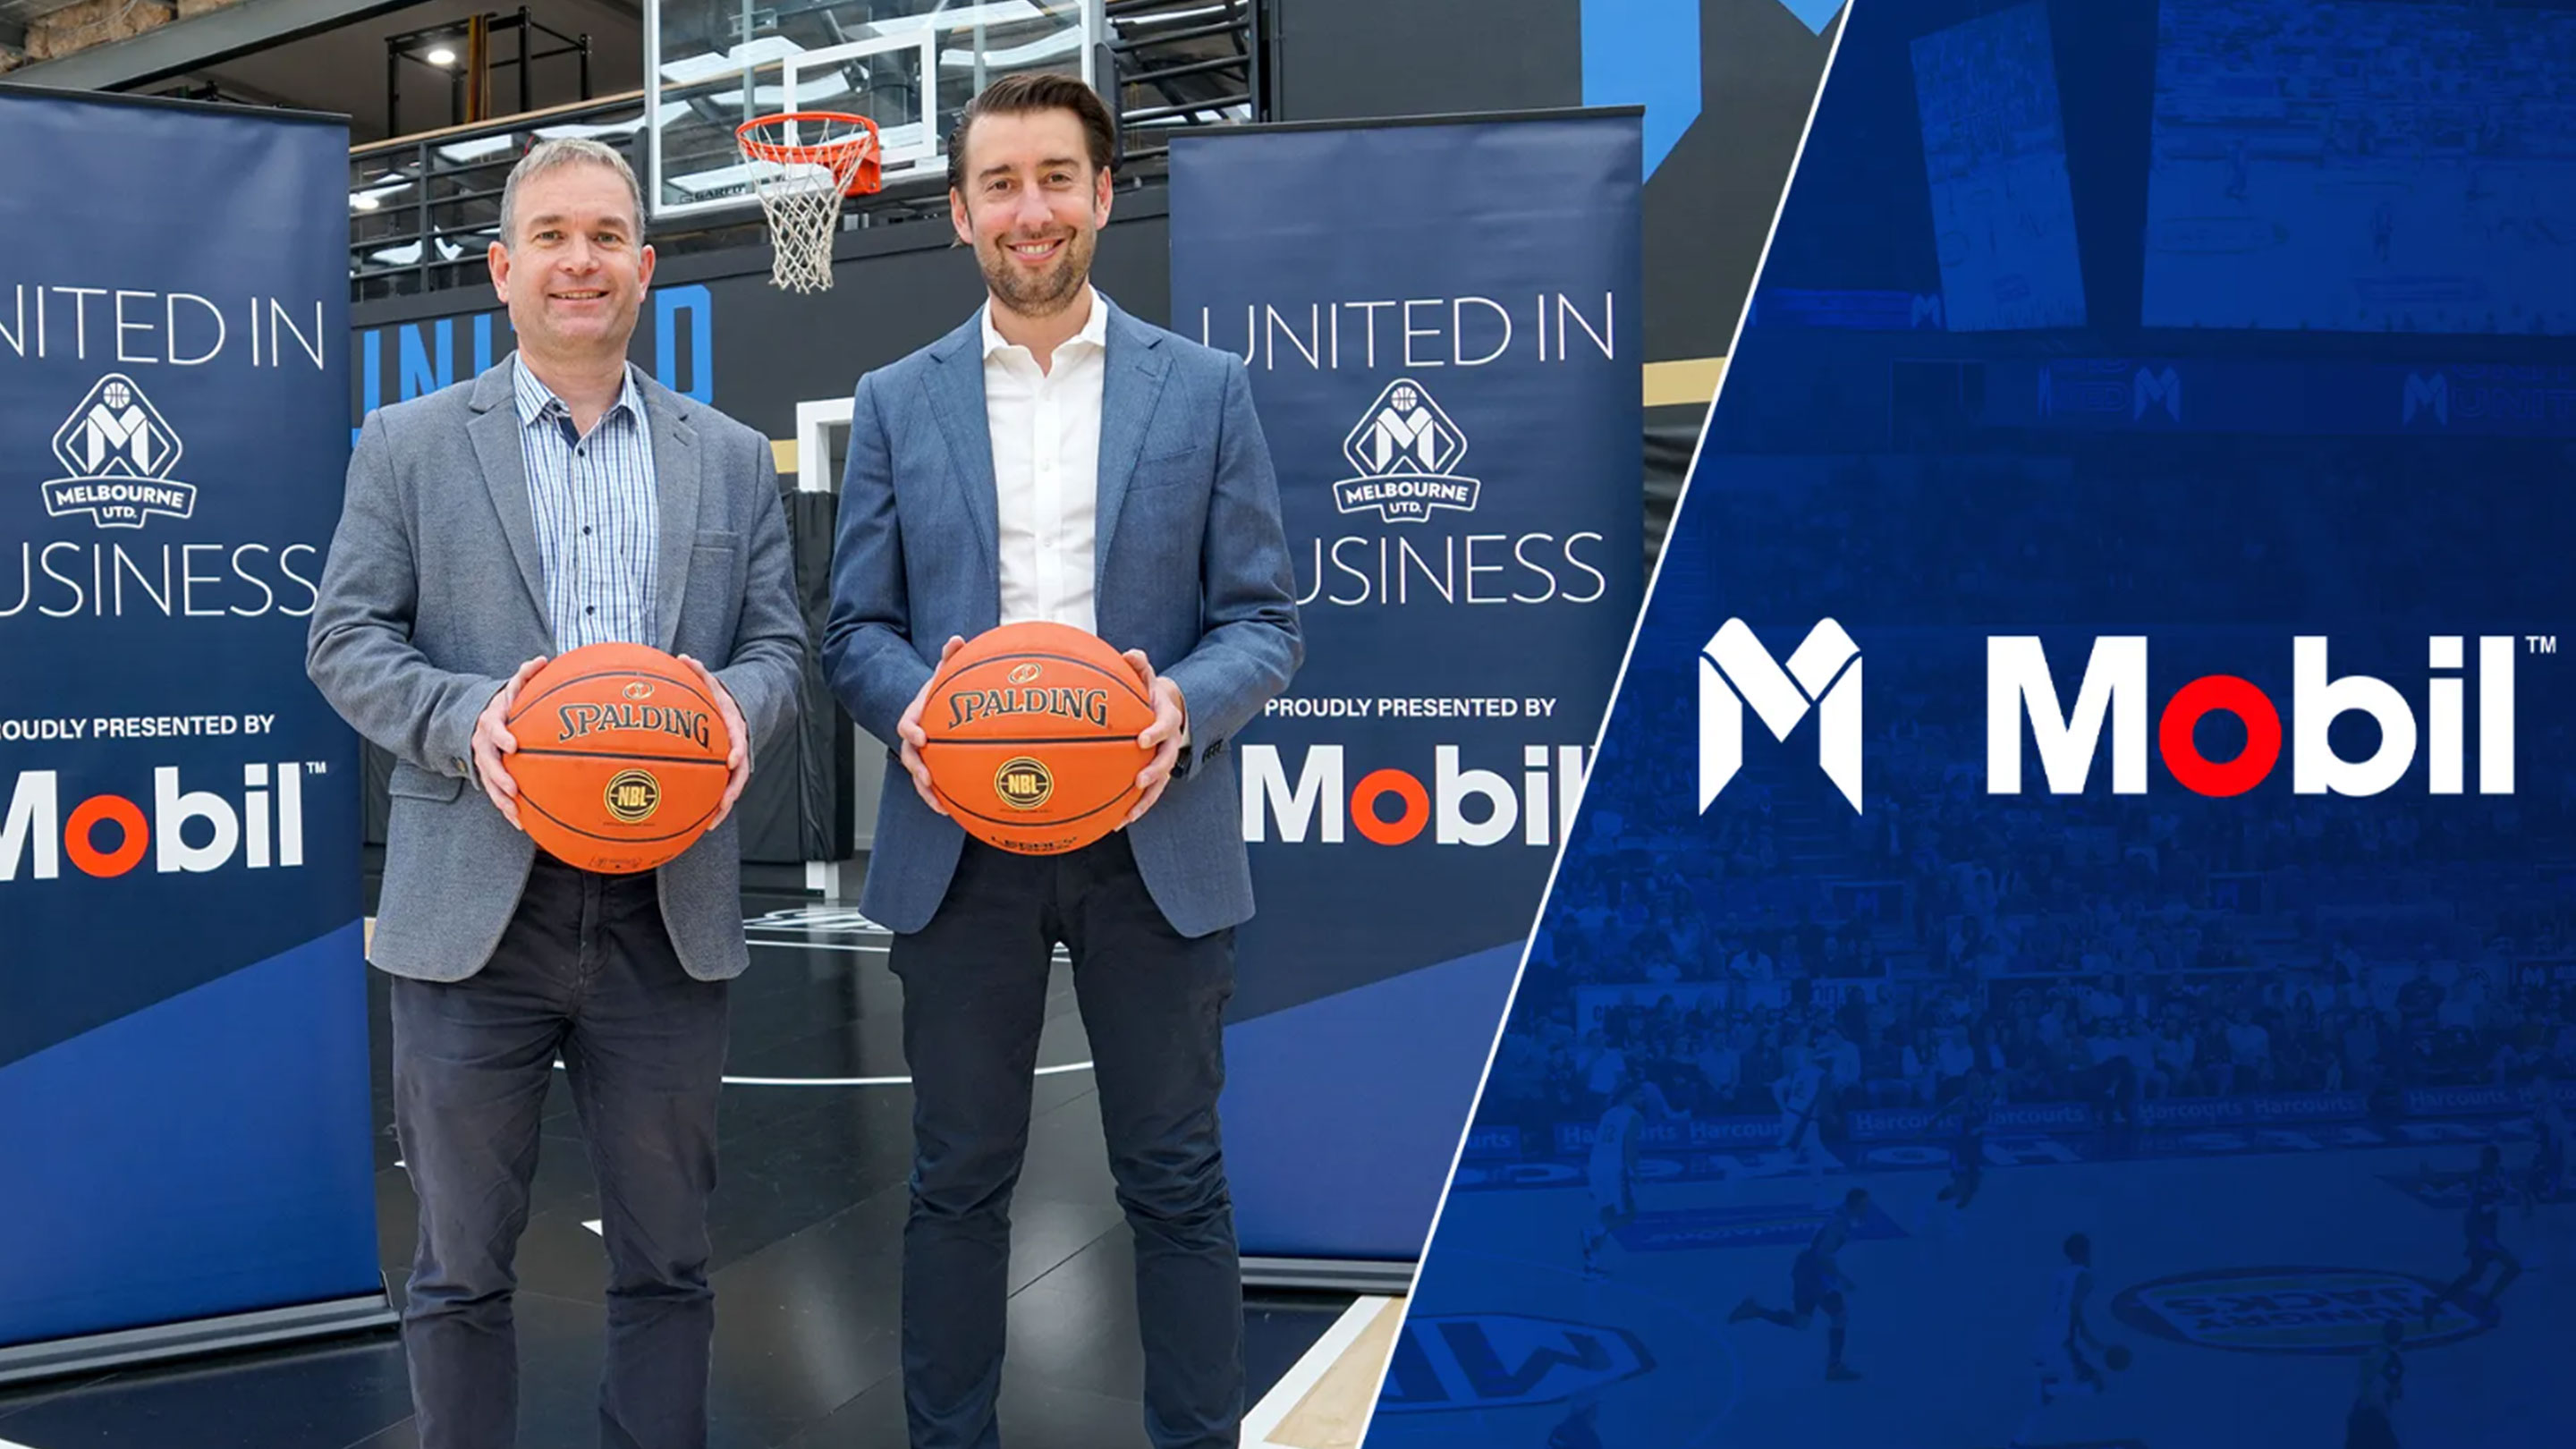 Mobil and Melbourne United announce extension of Mobil Card as the 'Presenting partner of United in Business'